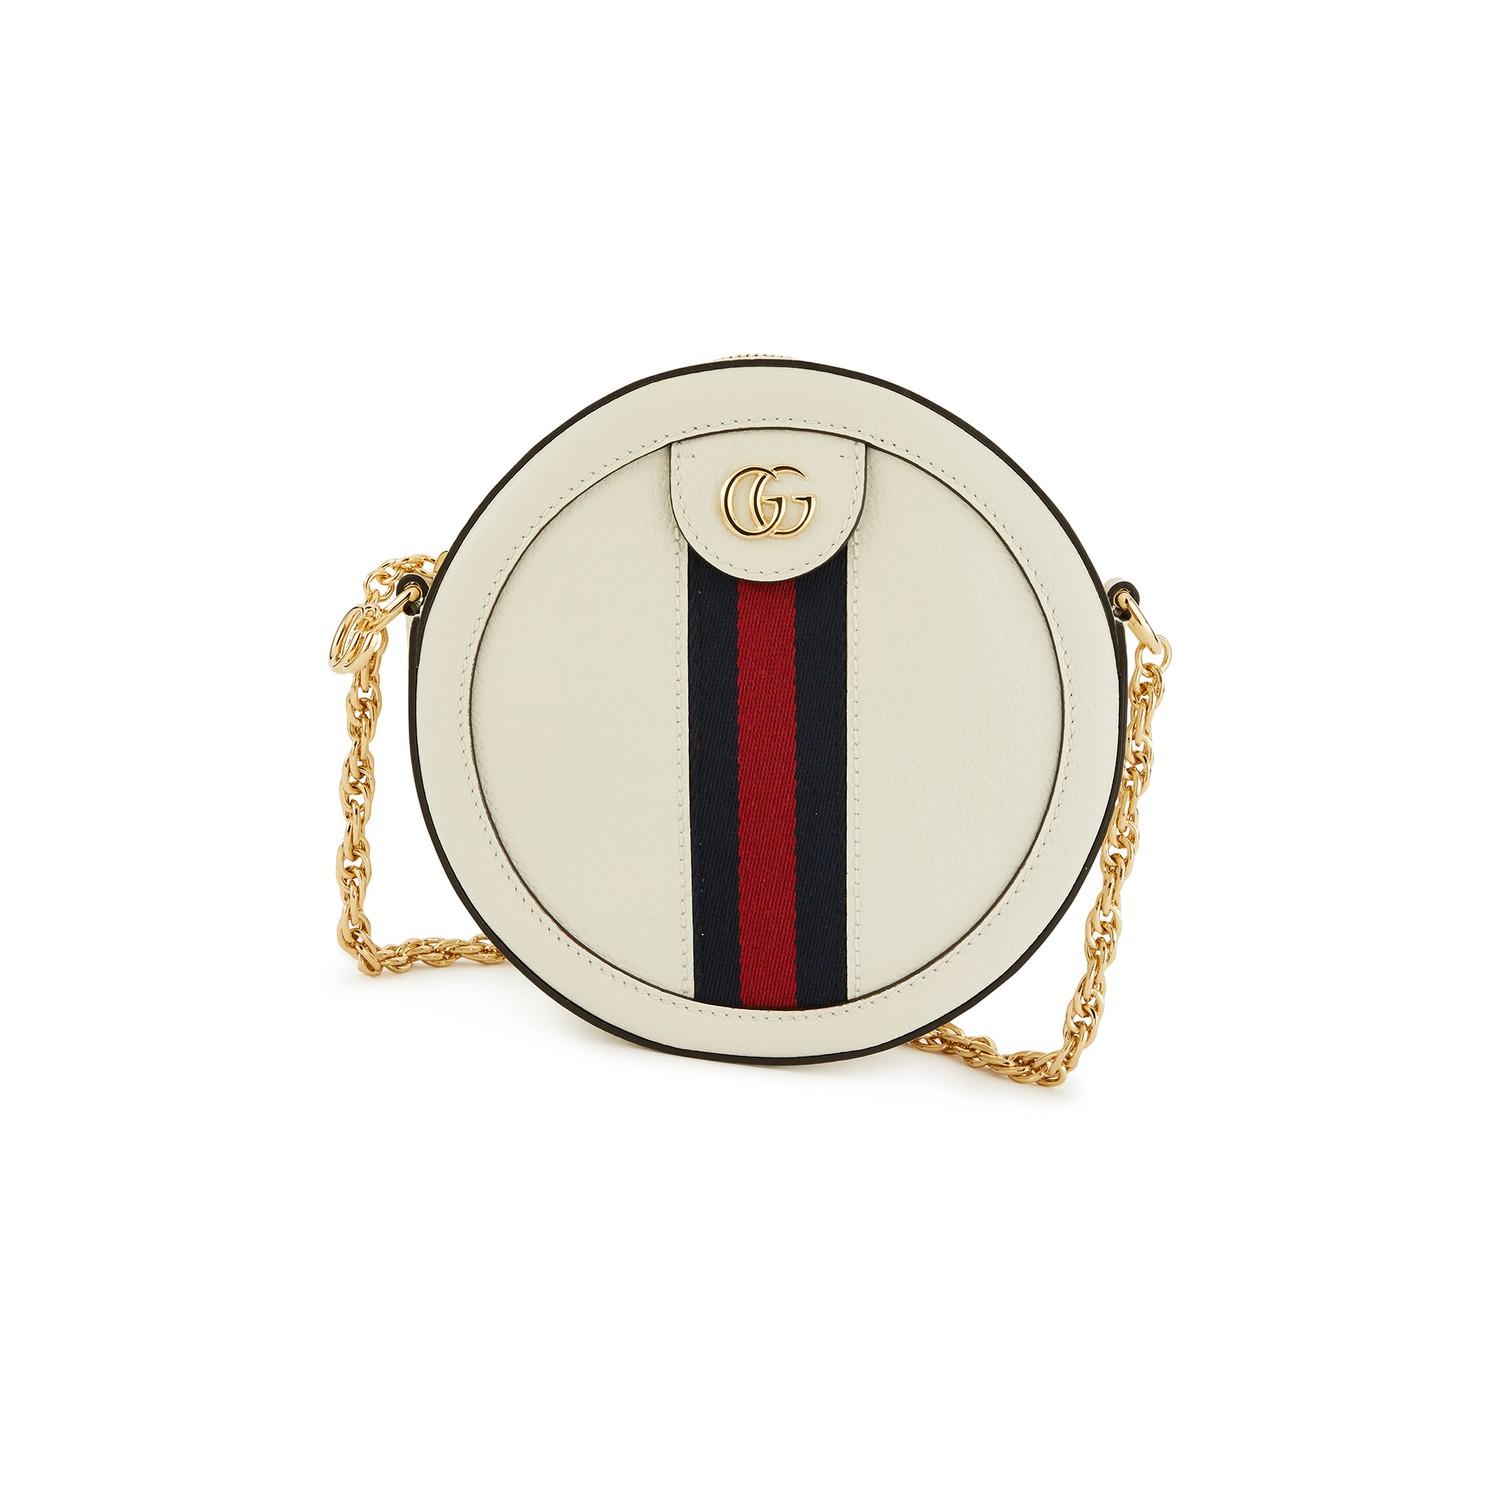 Gucci Ophidia Crossbody Bag in White - Lyst